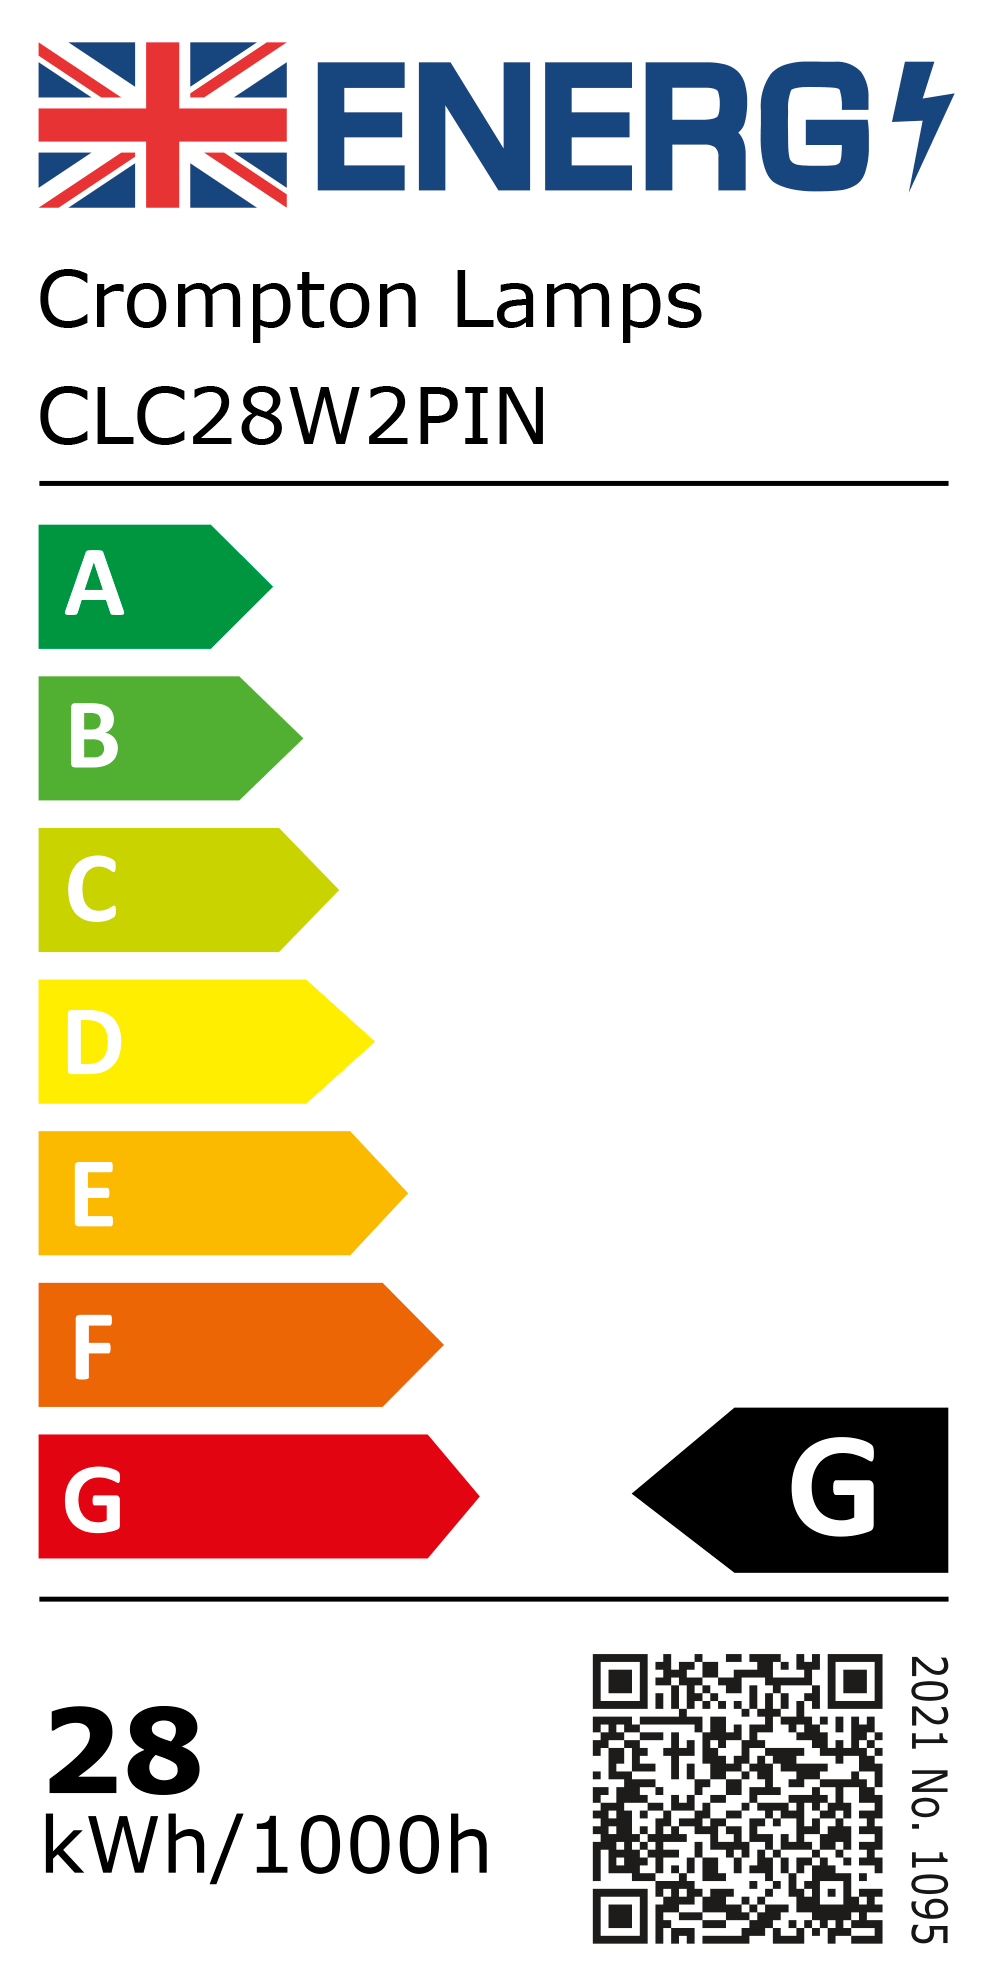 New 2021 Energy Rating Label: Stock Code CLC28W2PIN